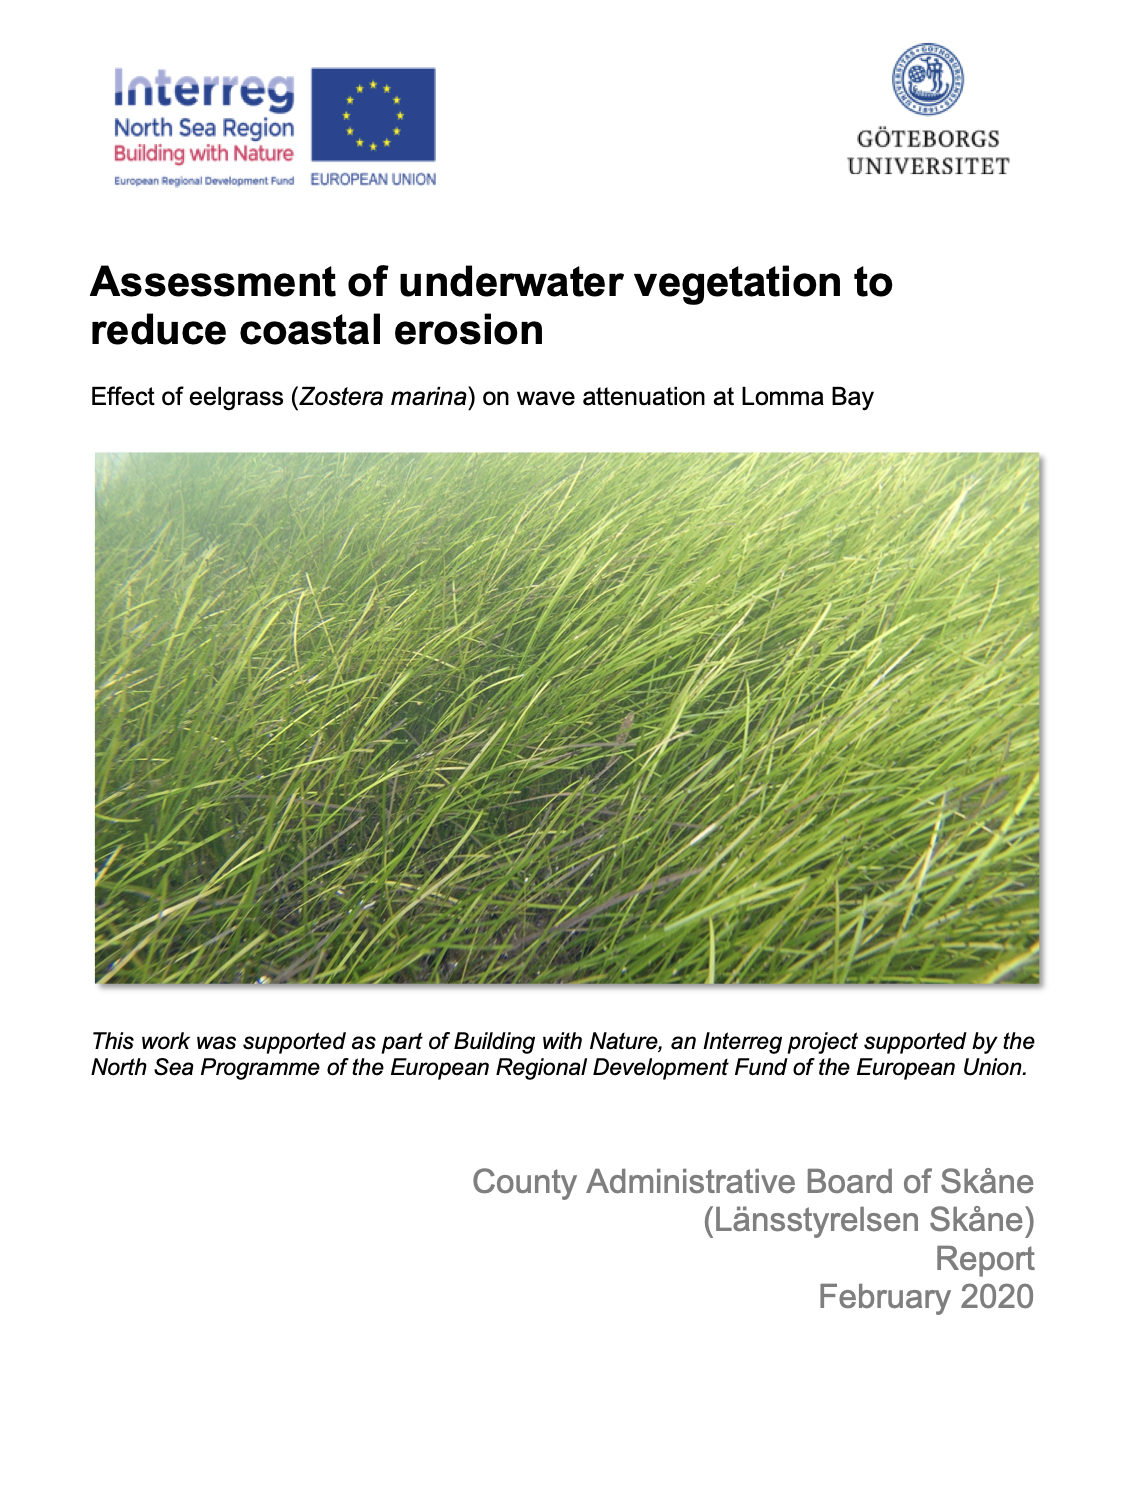 Effect of eelgrass (Zostera marina) on wave attenuation at Lomma Bay